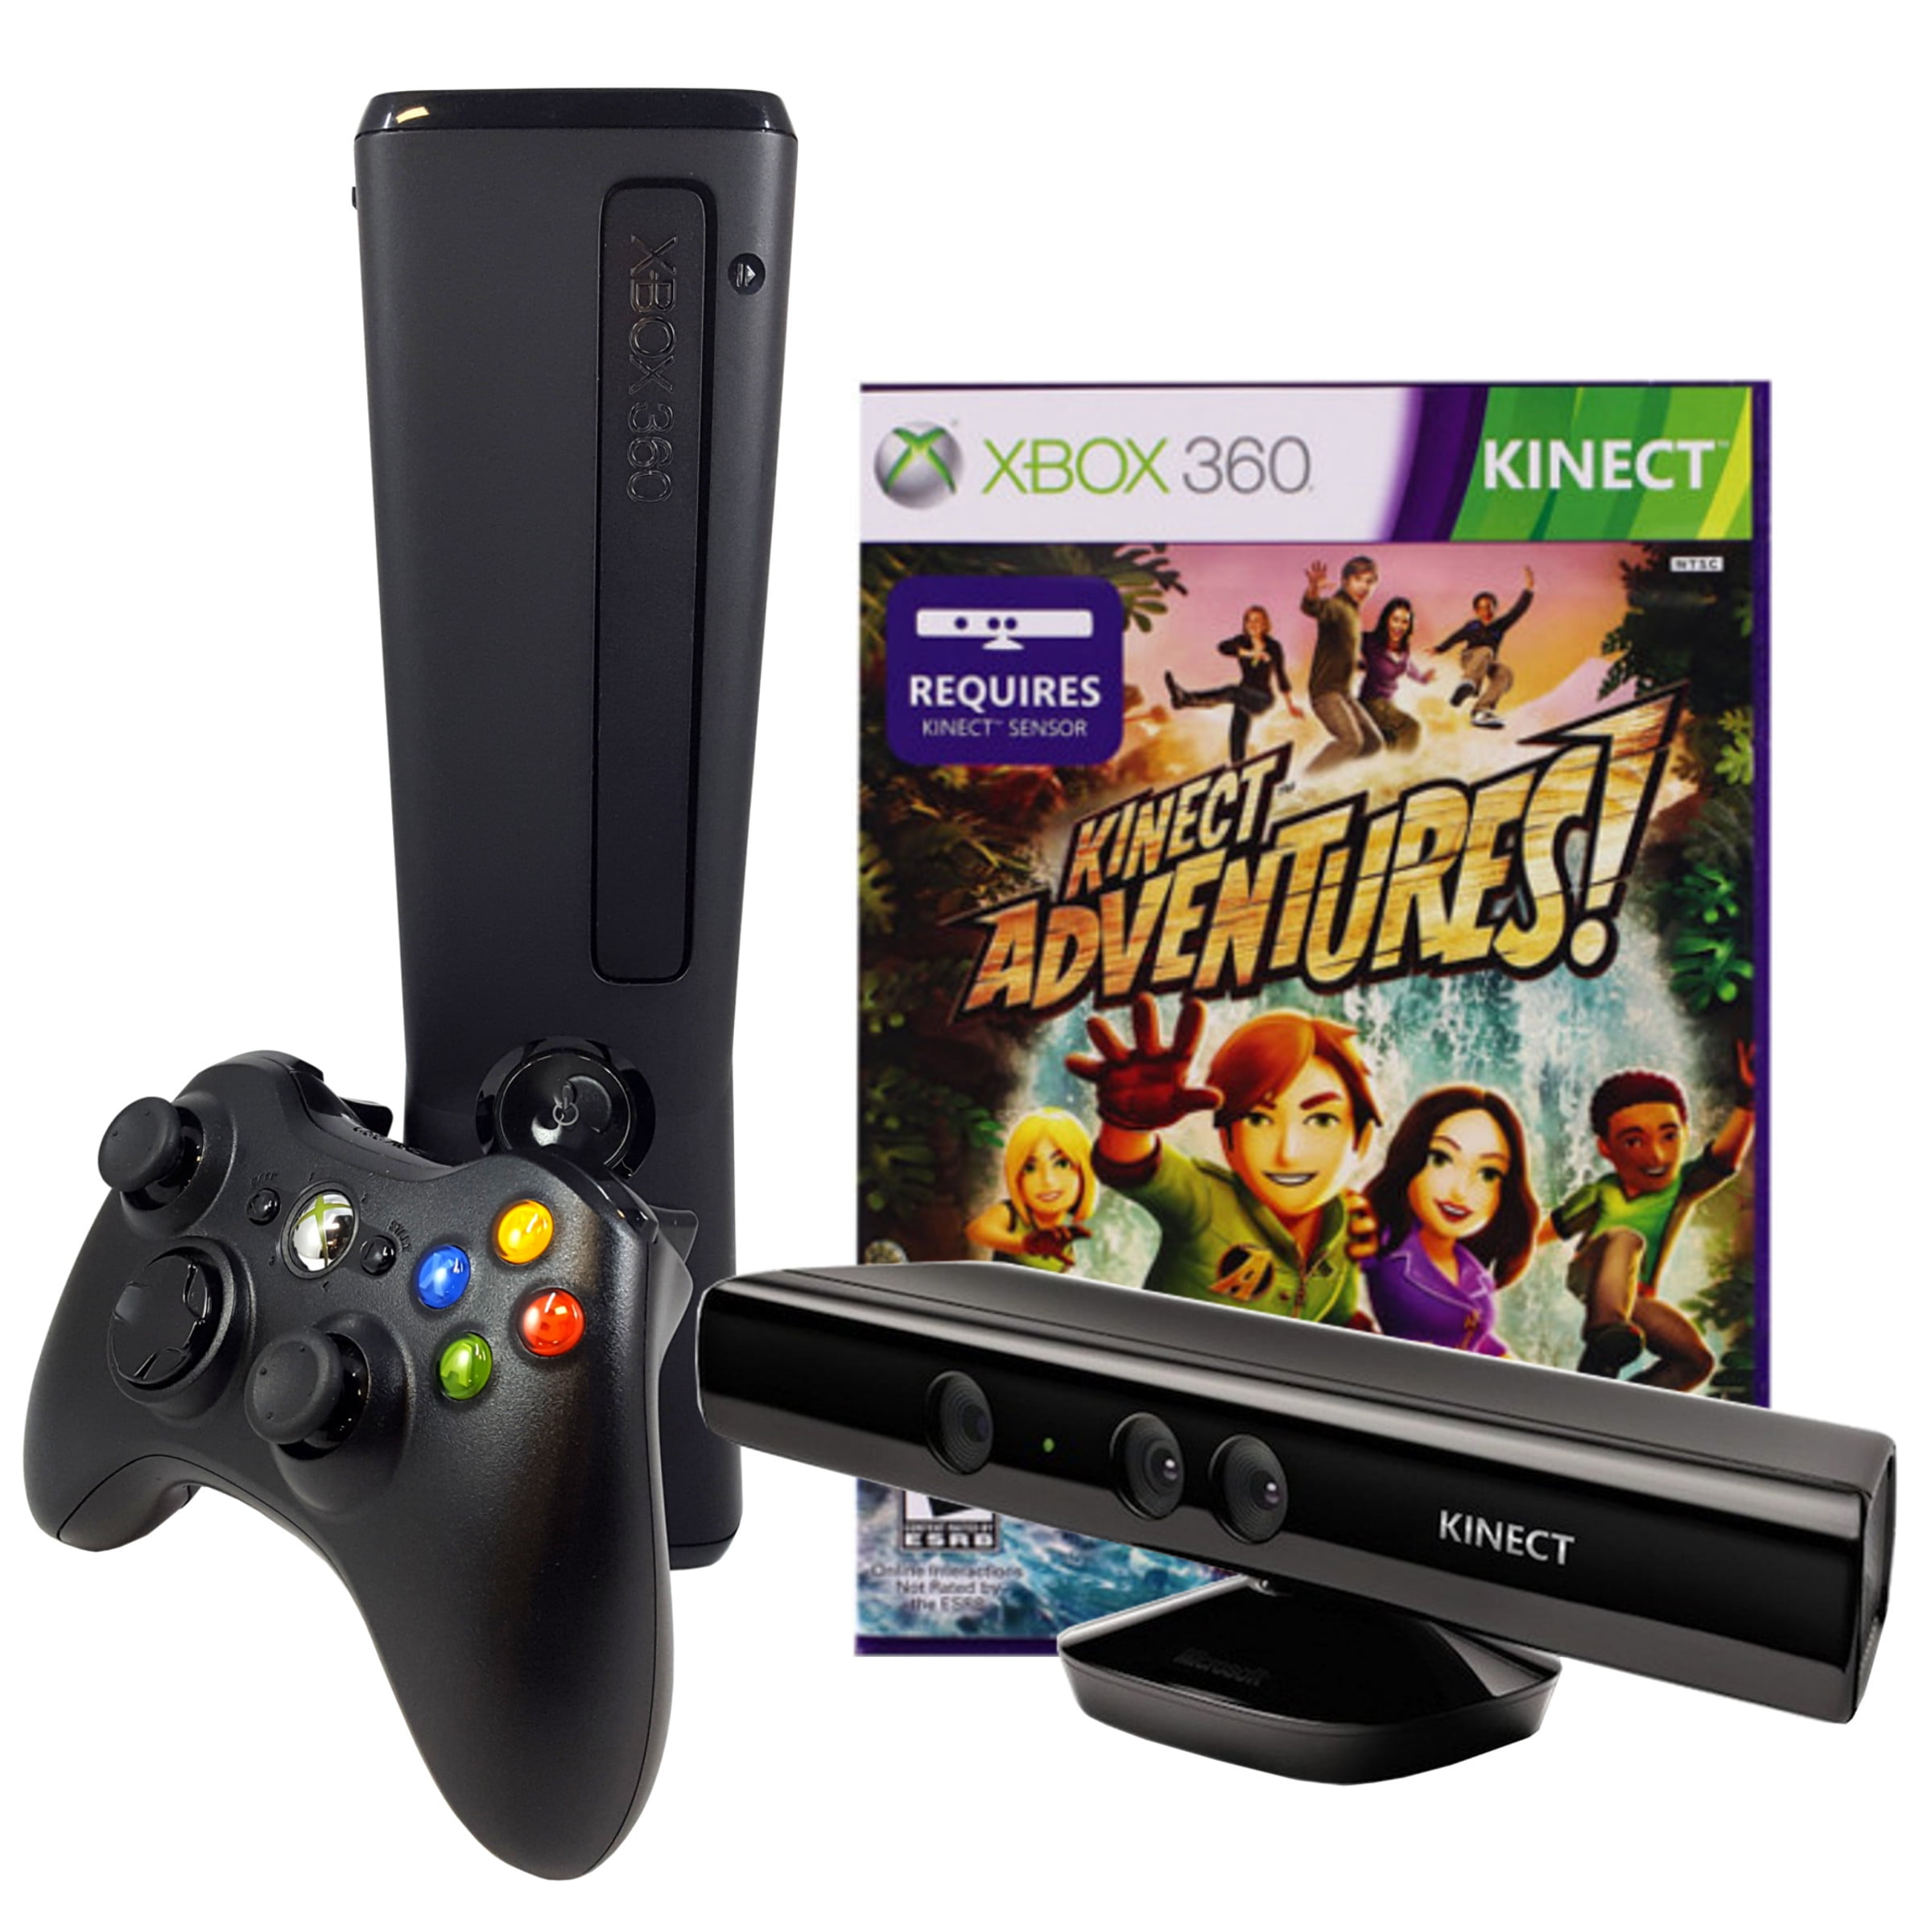 Microsoft Xbox 360 S 4gb Console With Kinect Sensor Gaming And